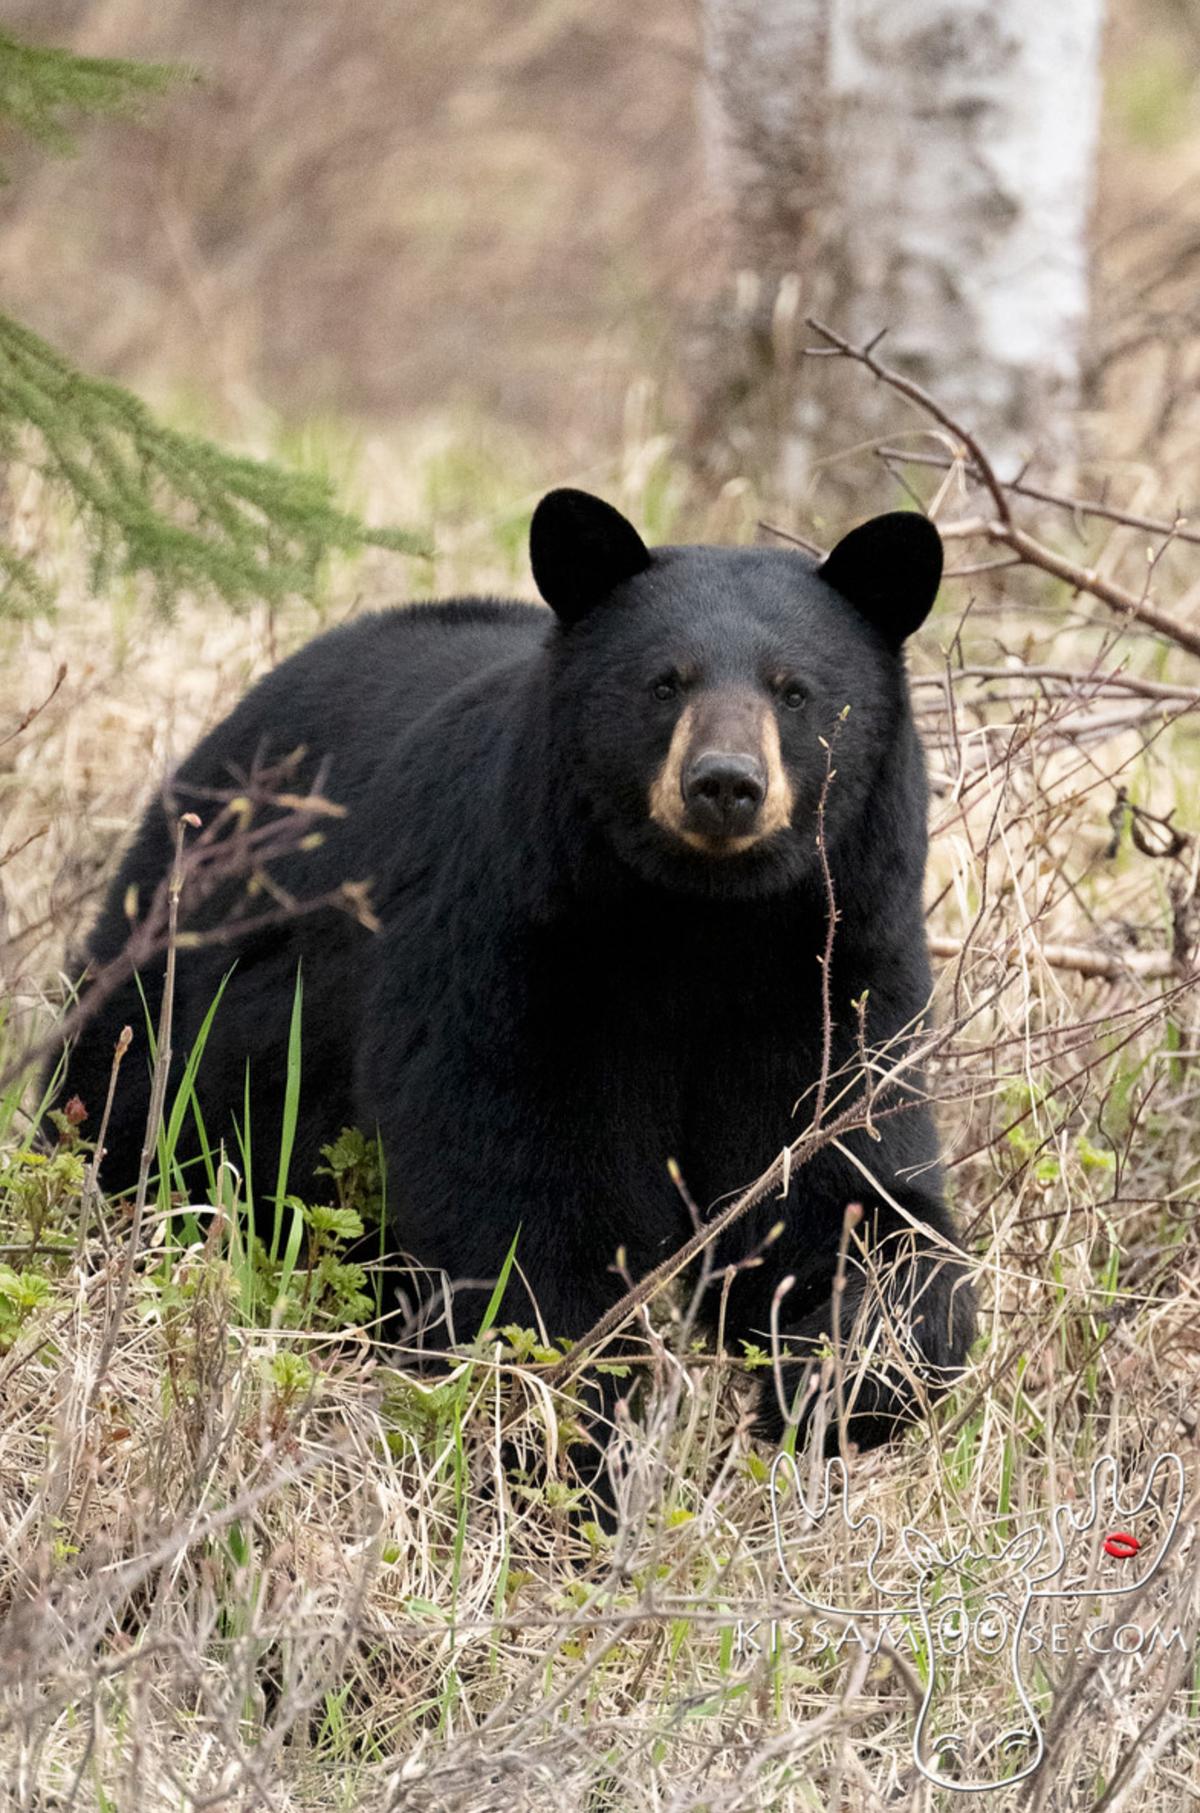 The black bear which was on the hunt for a mother moose's calf on May 16, photographed by Coby Brock on May 16. (Courtesy of Coby Brock)